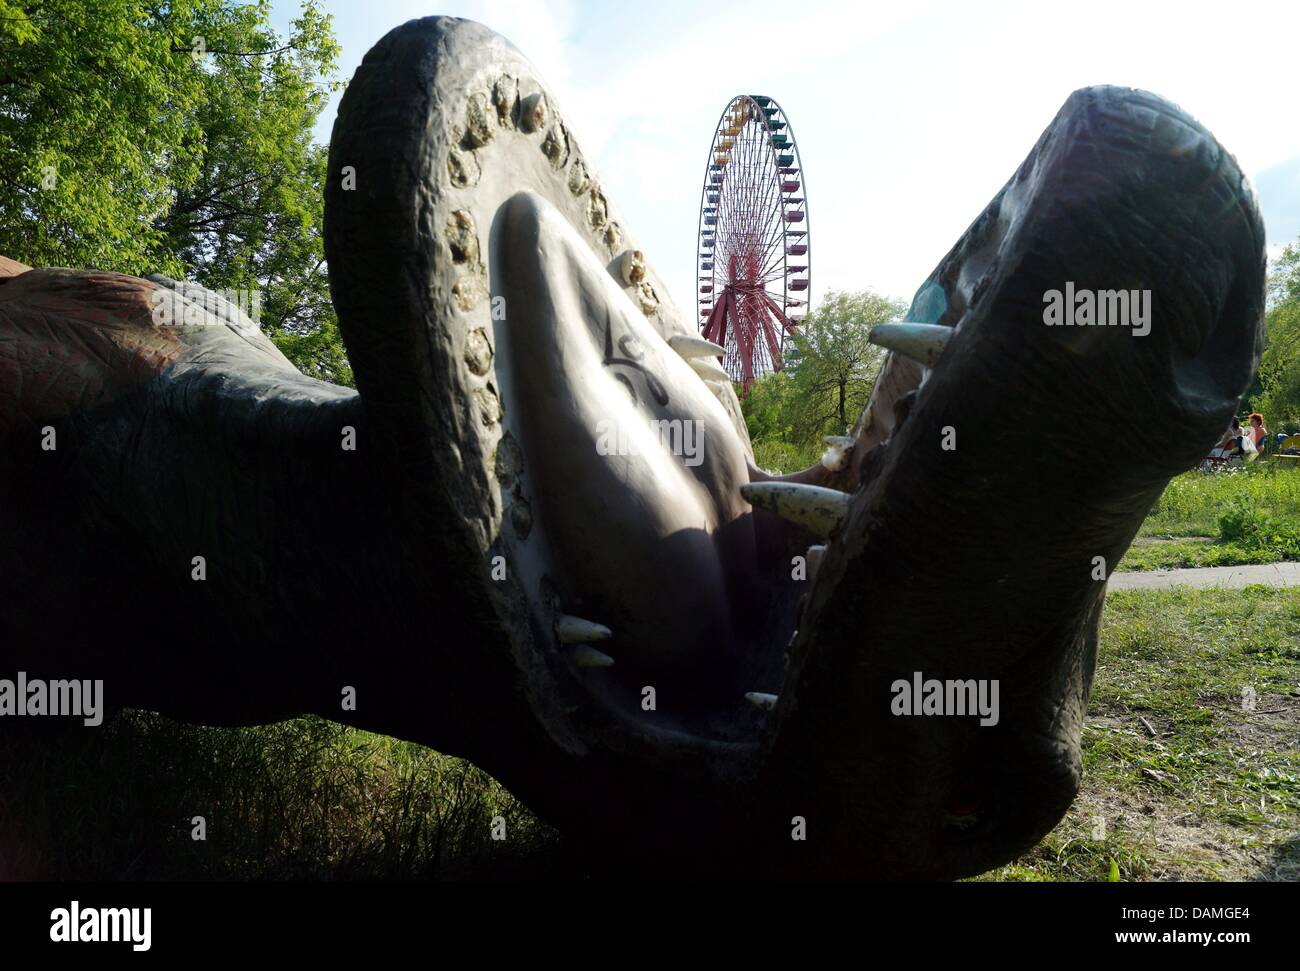 A life-sized dinosaur model lies on the ground in front of a ferris wheel in the Plaenterwald amusement park in Berlin, Germany, 26 May 2011. The Plaenterwald was the largest amusement park in East Germany but was closed down 10 years after the German Reunification. The park has been reopened for only a brief period of time featuring numerous attractions for visitors. Photo: Mauriz Stock Photo